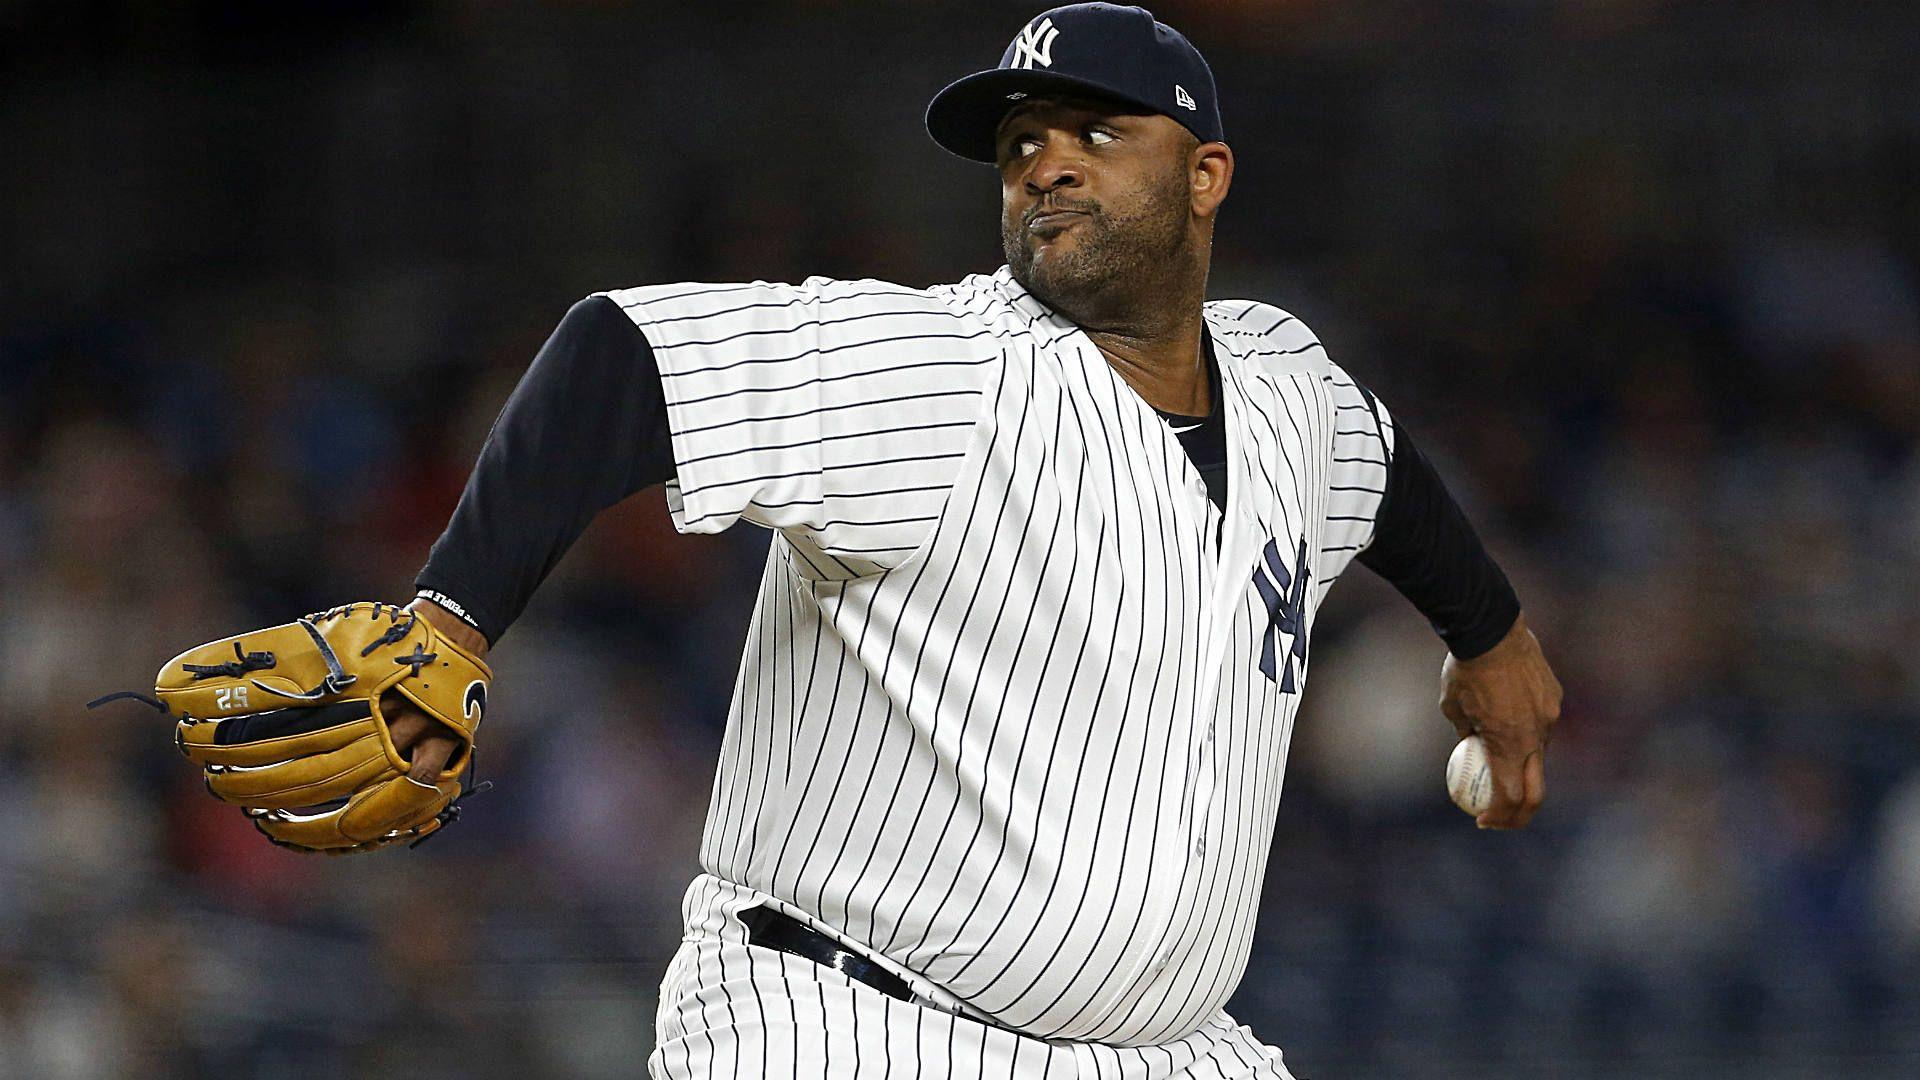 CC Sabathia could still make the Hall of Fame, but he's probably a